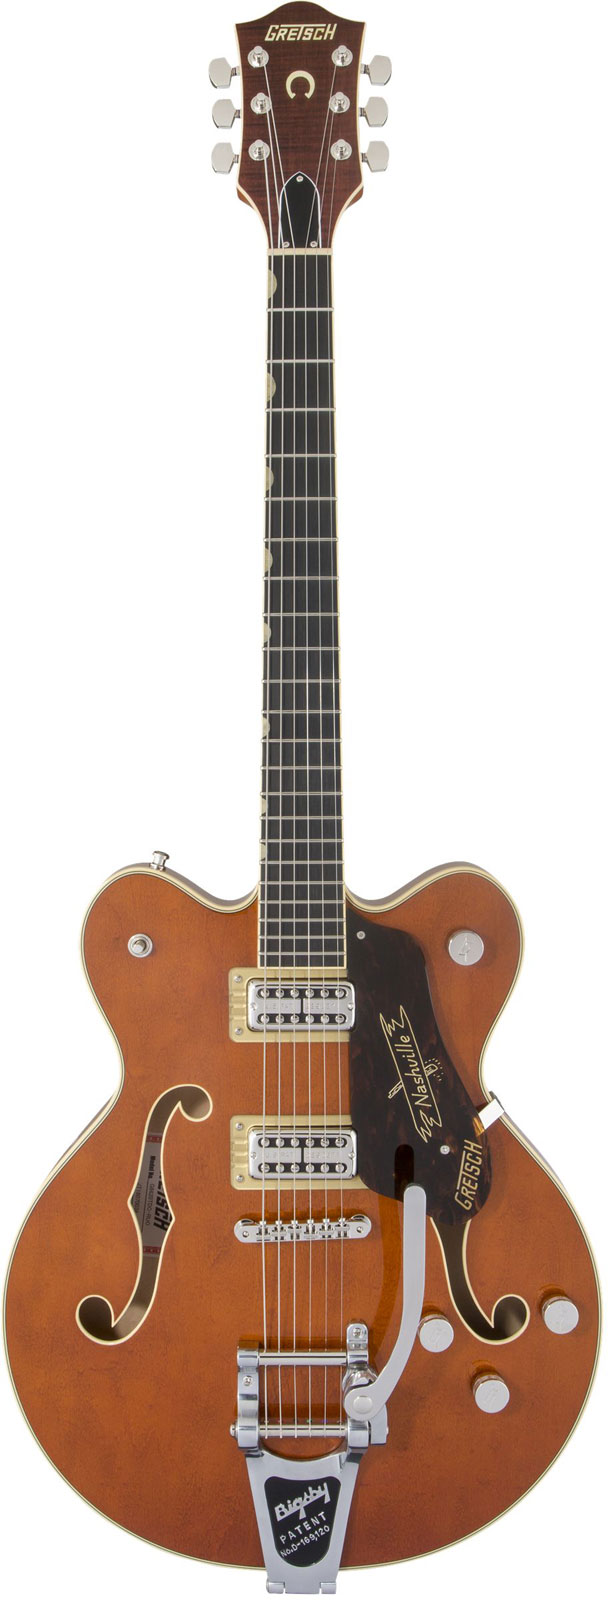 GRETSCH GUITARS G6620T PLAYERS EDITION NASHVILLE CENTER BLOCK DOUBLE-CUT WITH STRING-THRU BIGSBY, FILTER'TRON PICKUP